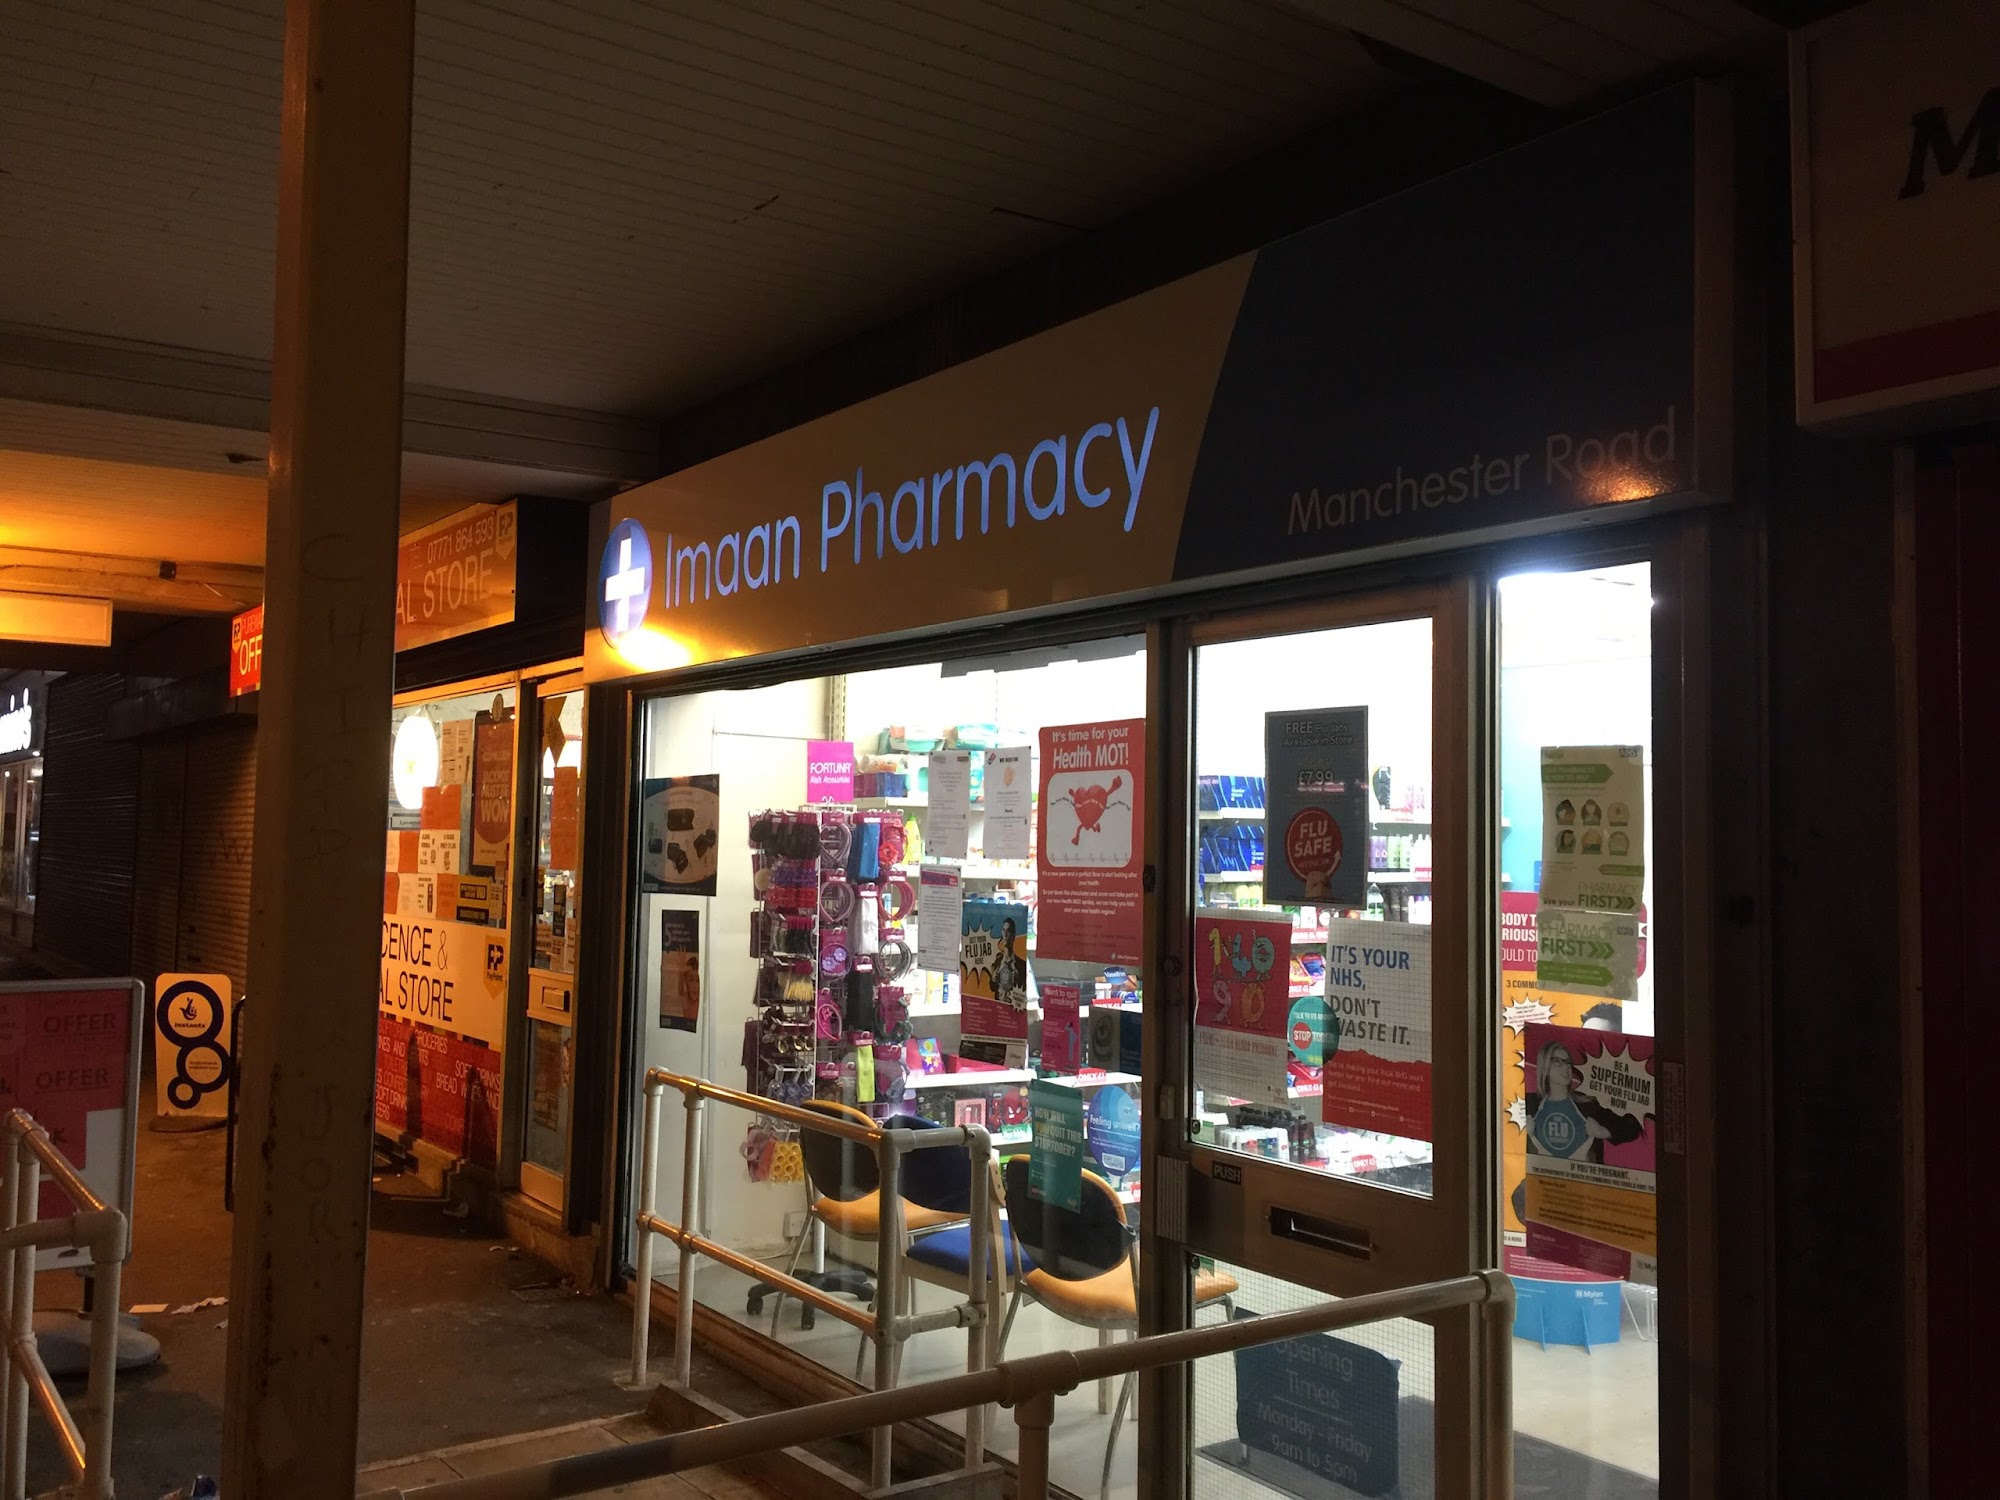 Manchester Road Pharmacy